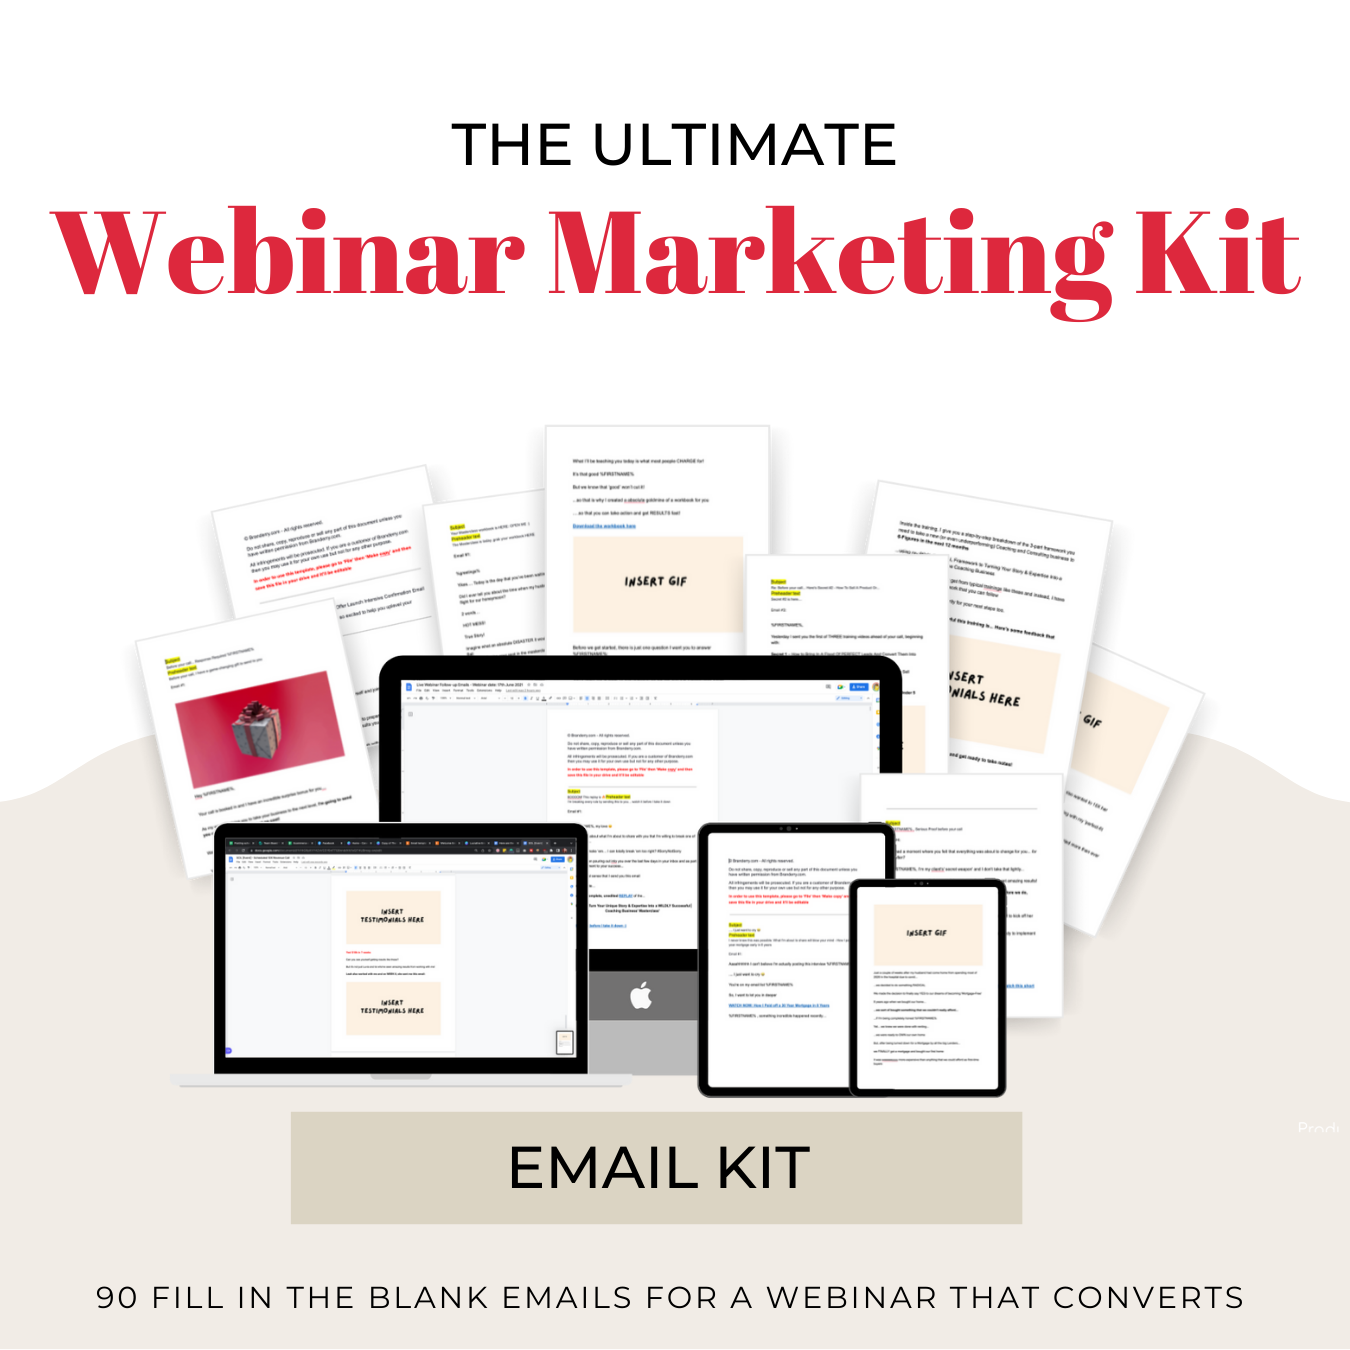 The Ultimate Email Marketing Kit